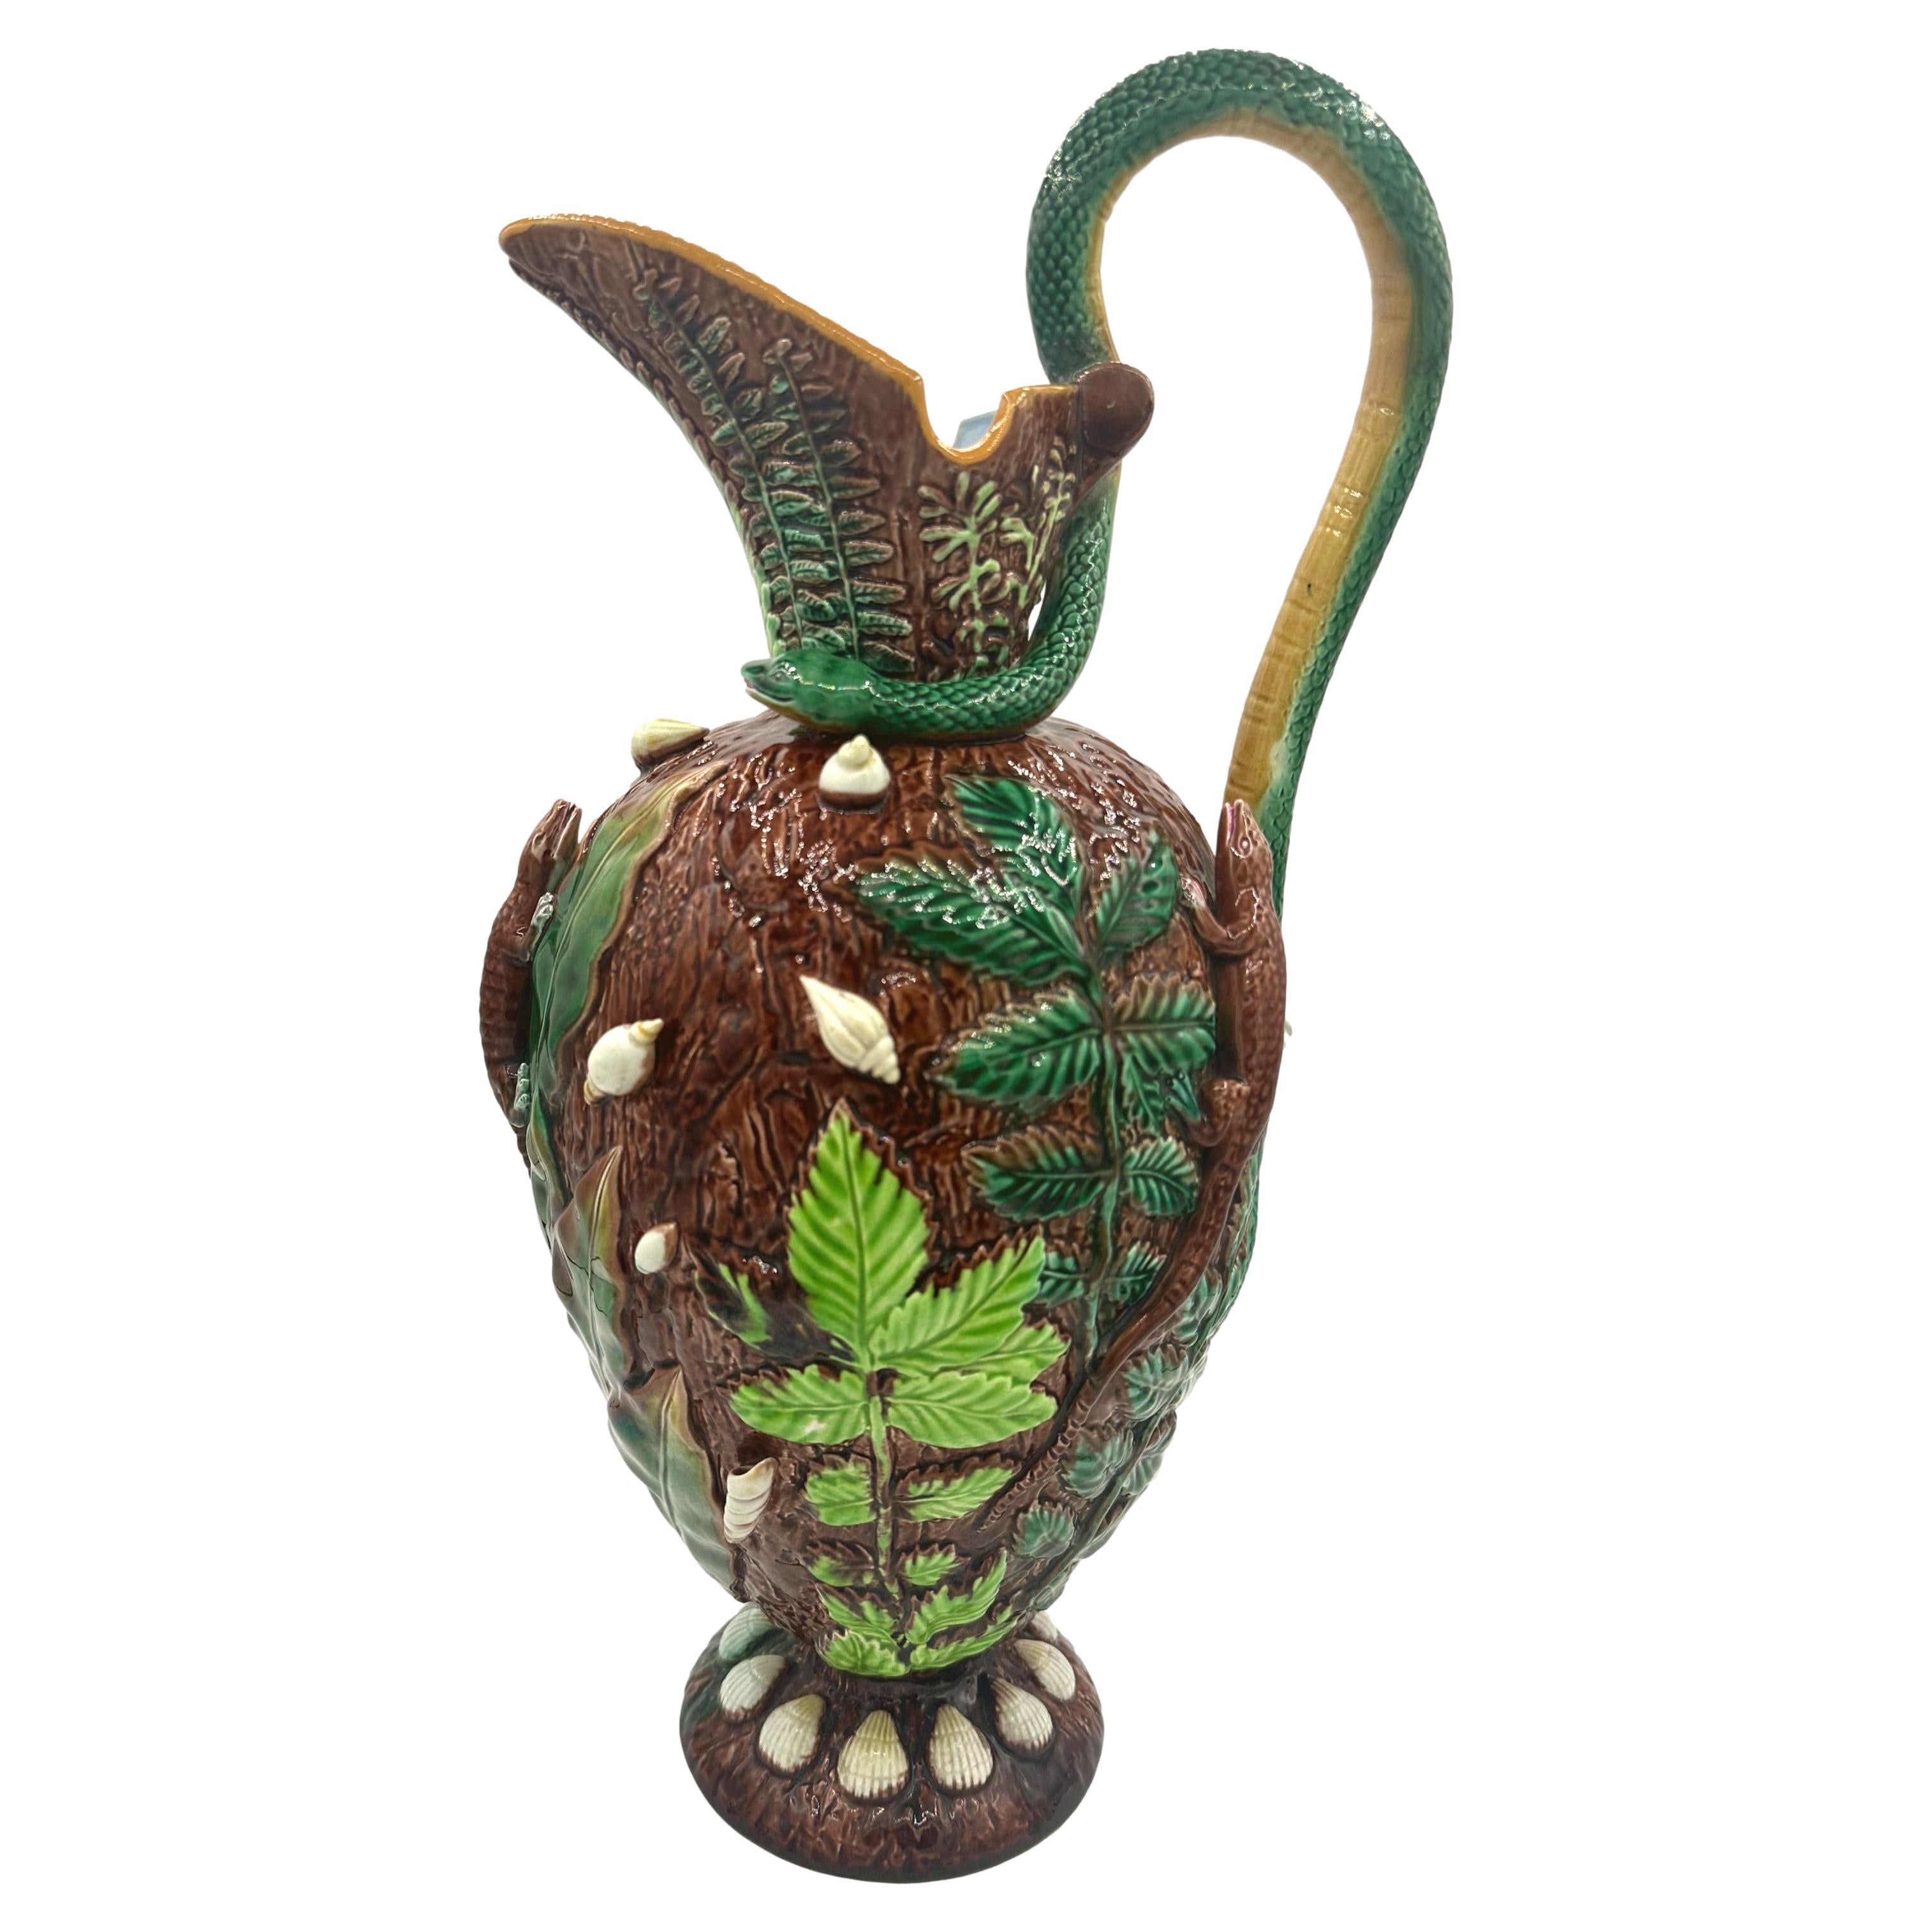 A George Jones Majolica 'Palissy Vase' with Snake Handle, English, ca. 1870